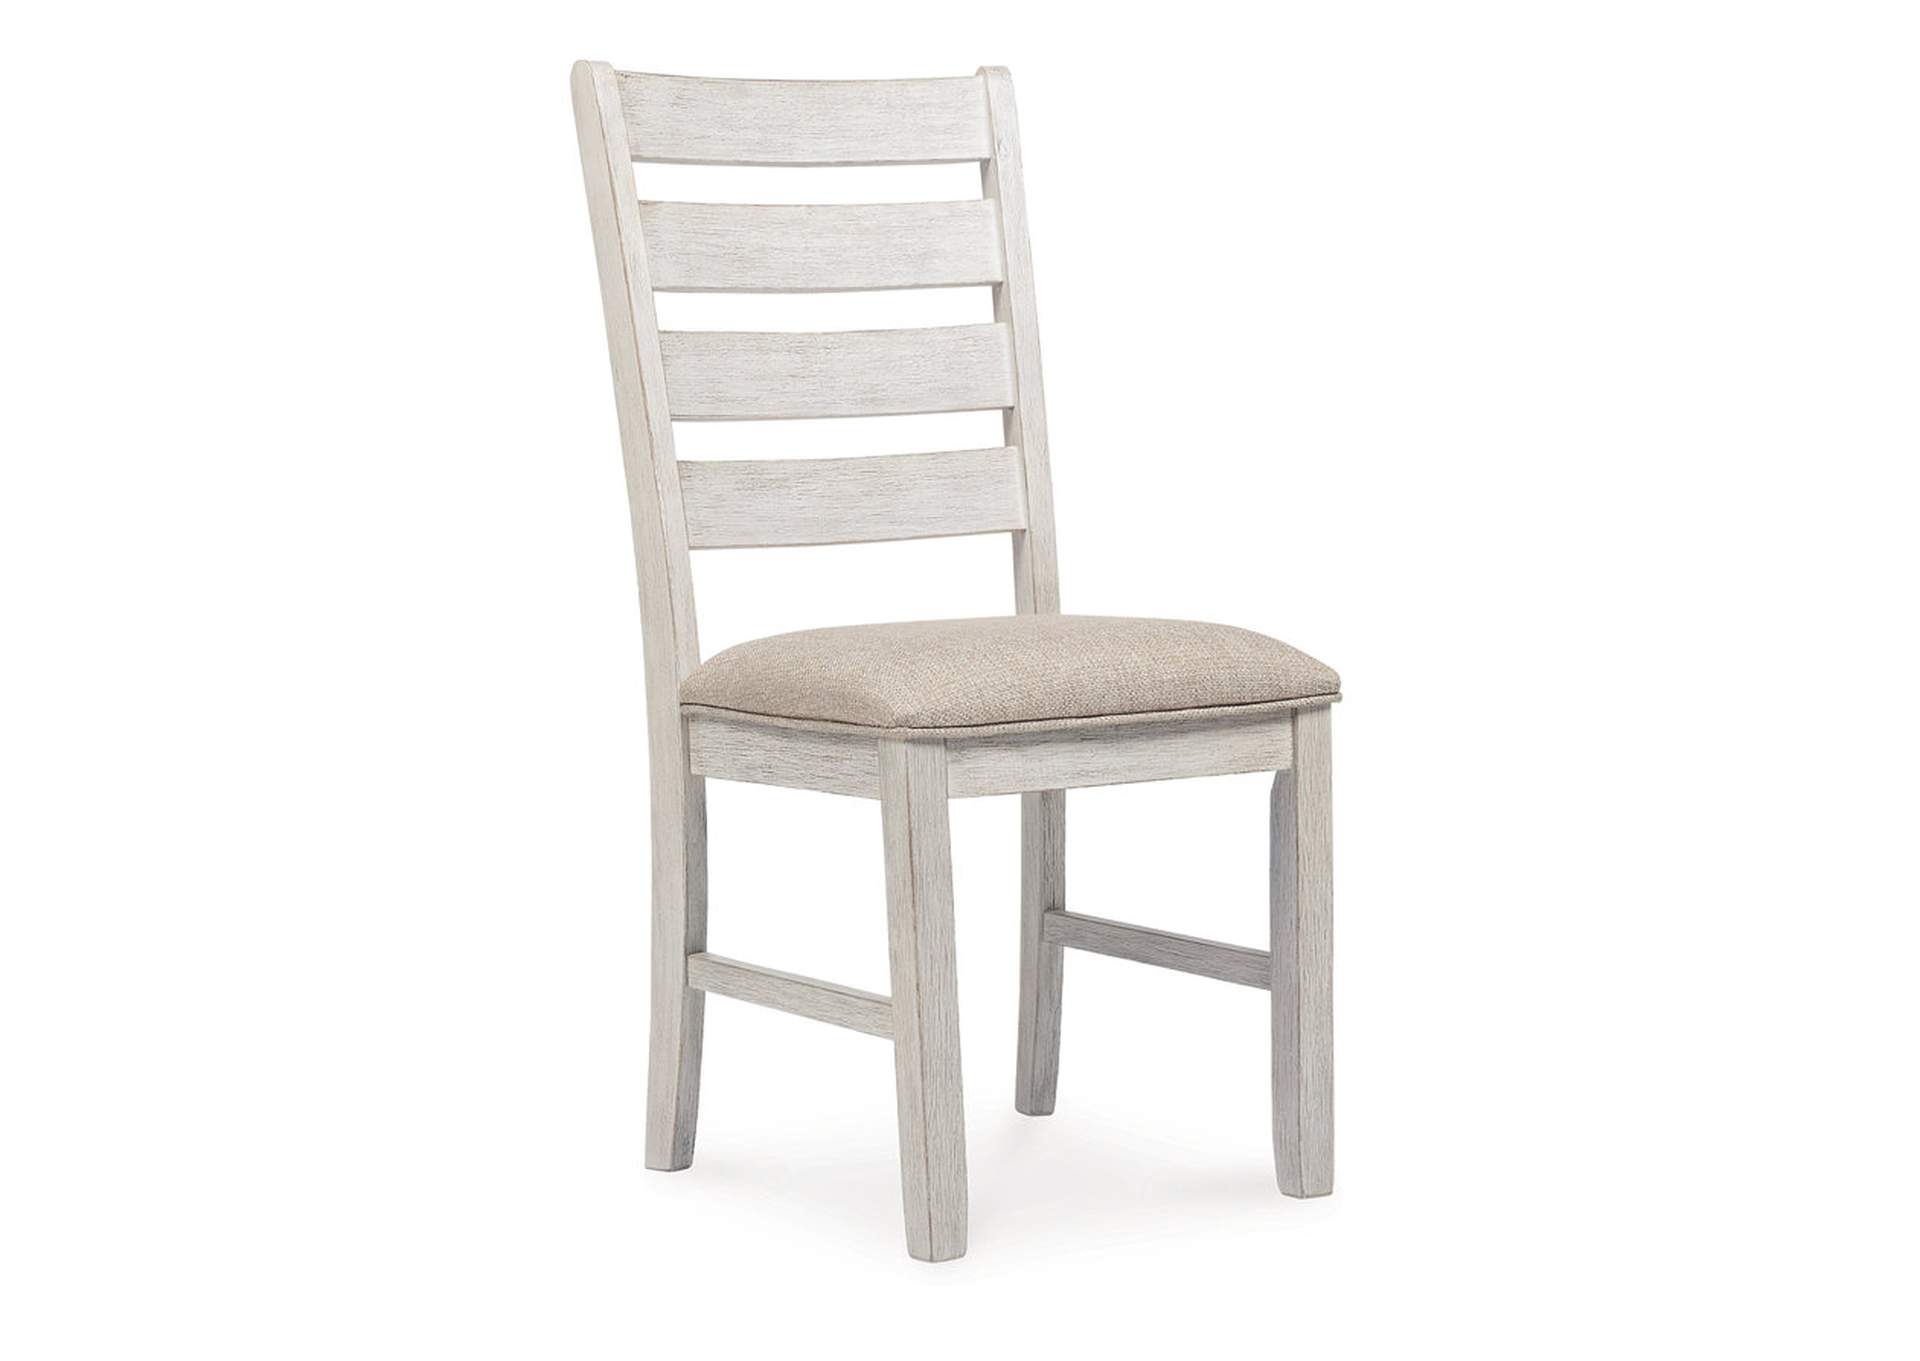 Skempton Dining Chair,Signature Design By Ashley